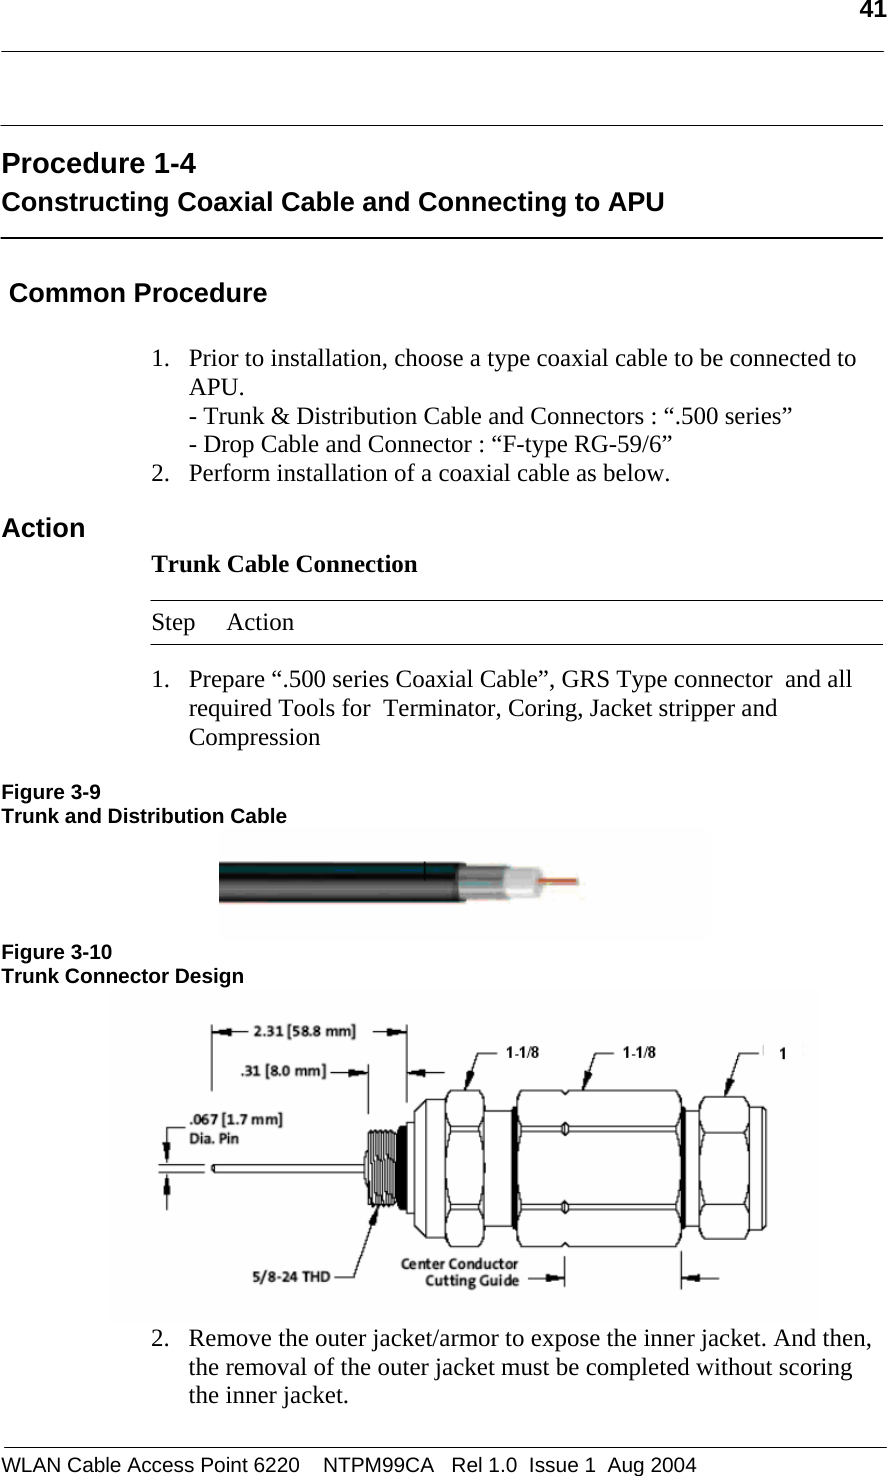   41   Procedure 1-4 Constructing Coaxial Cable and Connecting to APU   Common Procedure  1. Prior to installation, choose a type coaxial cable to be connected to APU. - Trunk &amp; Distribution Cable and Connectors : “.500 series” - Drop Cable and Connector : “F-type RG-59/6” 2. Perform installation of a coaxial cable as below. Action Trunk Cable Connection   Step Action  1. Prepare “.500 series Coaxial Cable”, GRS Type connector  and all required Tools for  Terminator, Coring, Jacket stripper and Compression   Figure 3-9 Trunk and Distribution Cable  Figure 3-10 Trunk Connector Design  2. Remove the outer jacket/armor to expose the inner jacket. And then, the removal of the outer jacket must be completed without scoring the inner jacket. WLAN Cable Access Point 6220    NTPM99CA   Rel 1.0  Issue 1  Aug 2004 